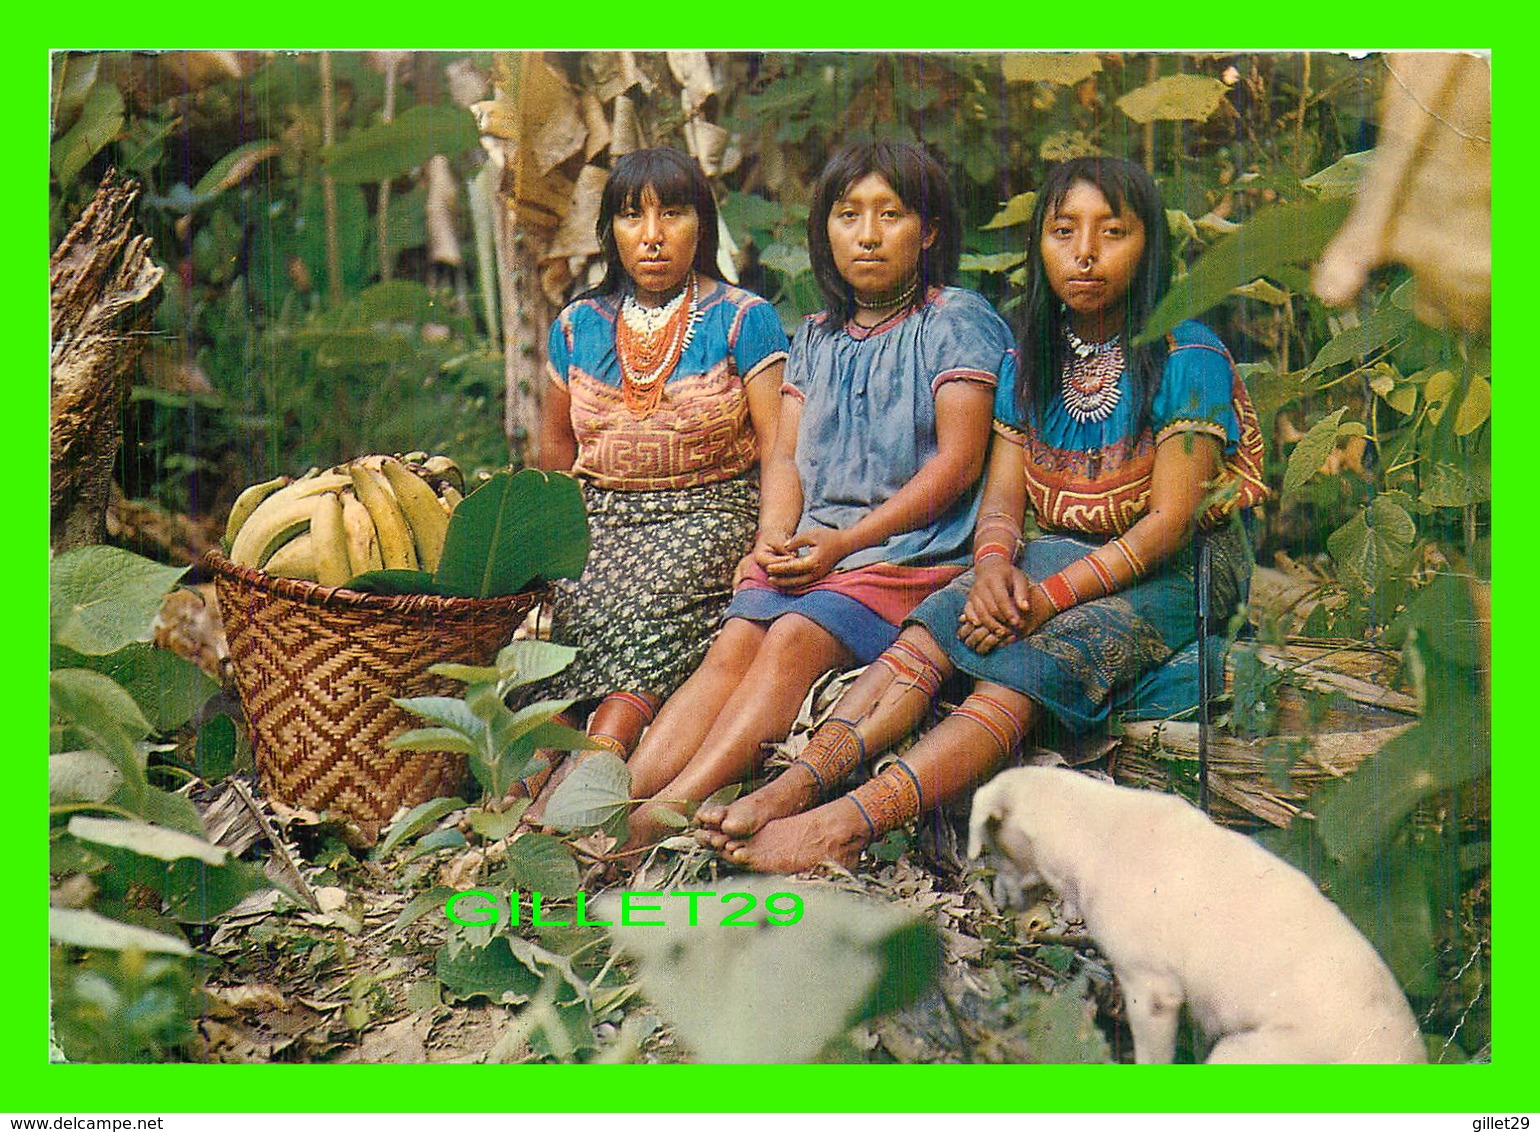 CHOCO, COLOMBIA - GROUP OF CHOCO INDIAN GIRLS IN THEIR TYPICAL COSTUMES - TRAVEL IN 1972 - FOTORAMA - - Kolumbien